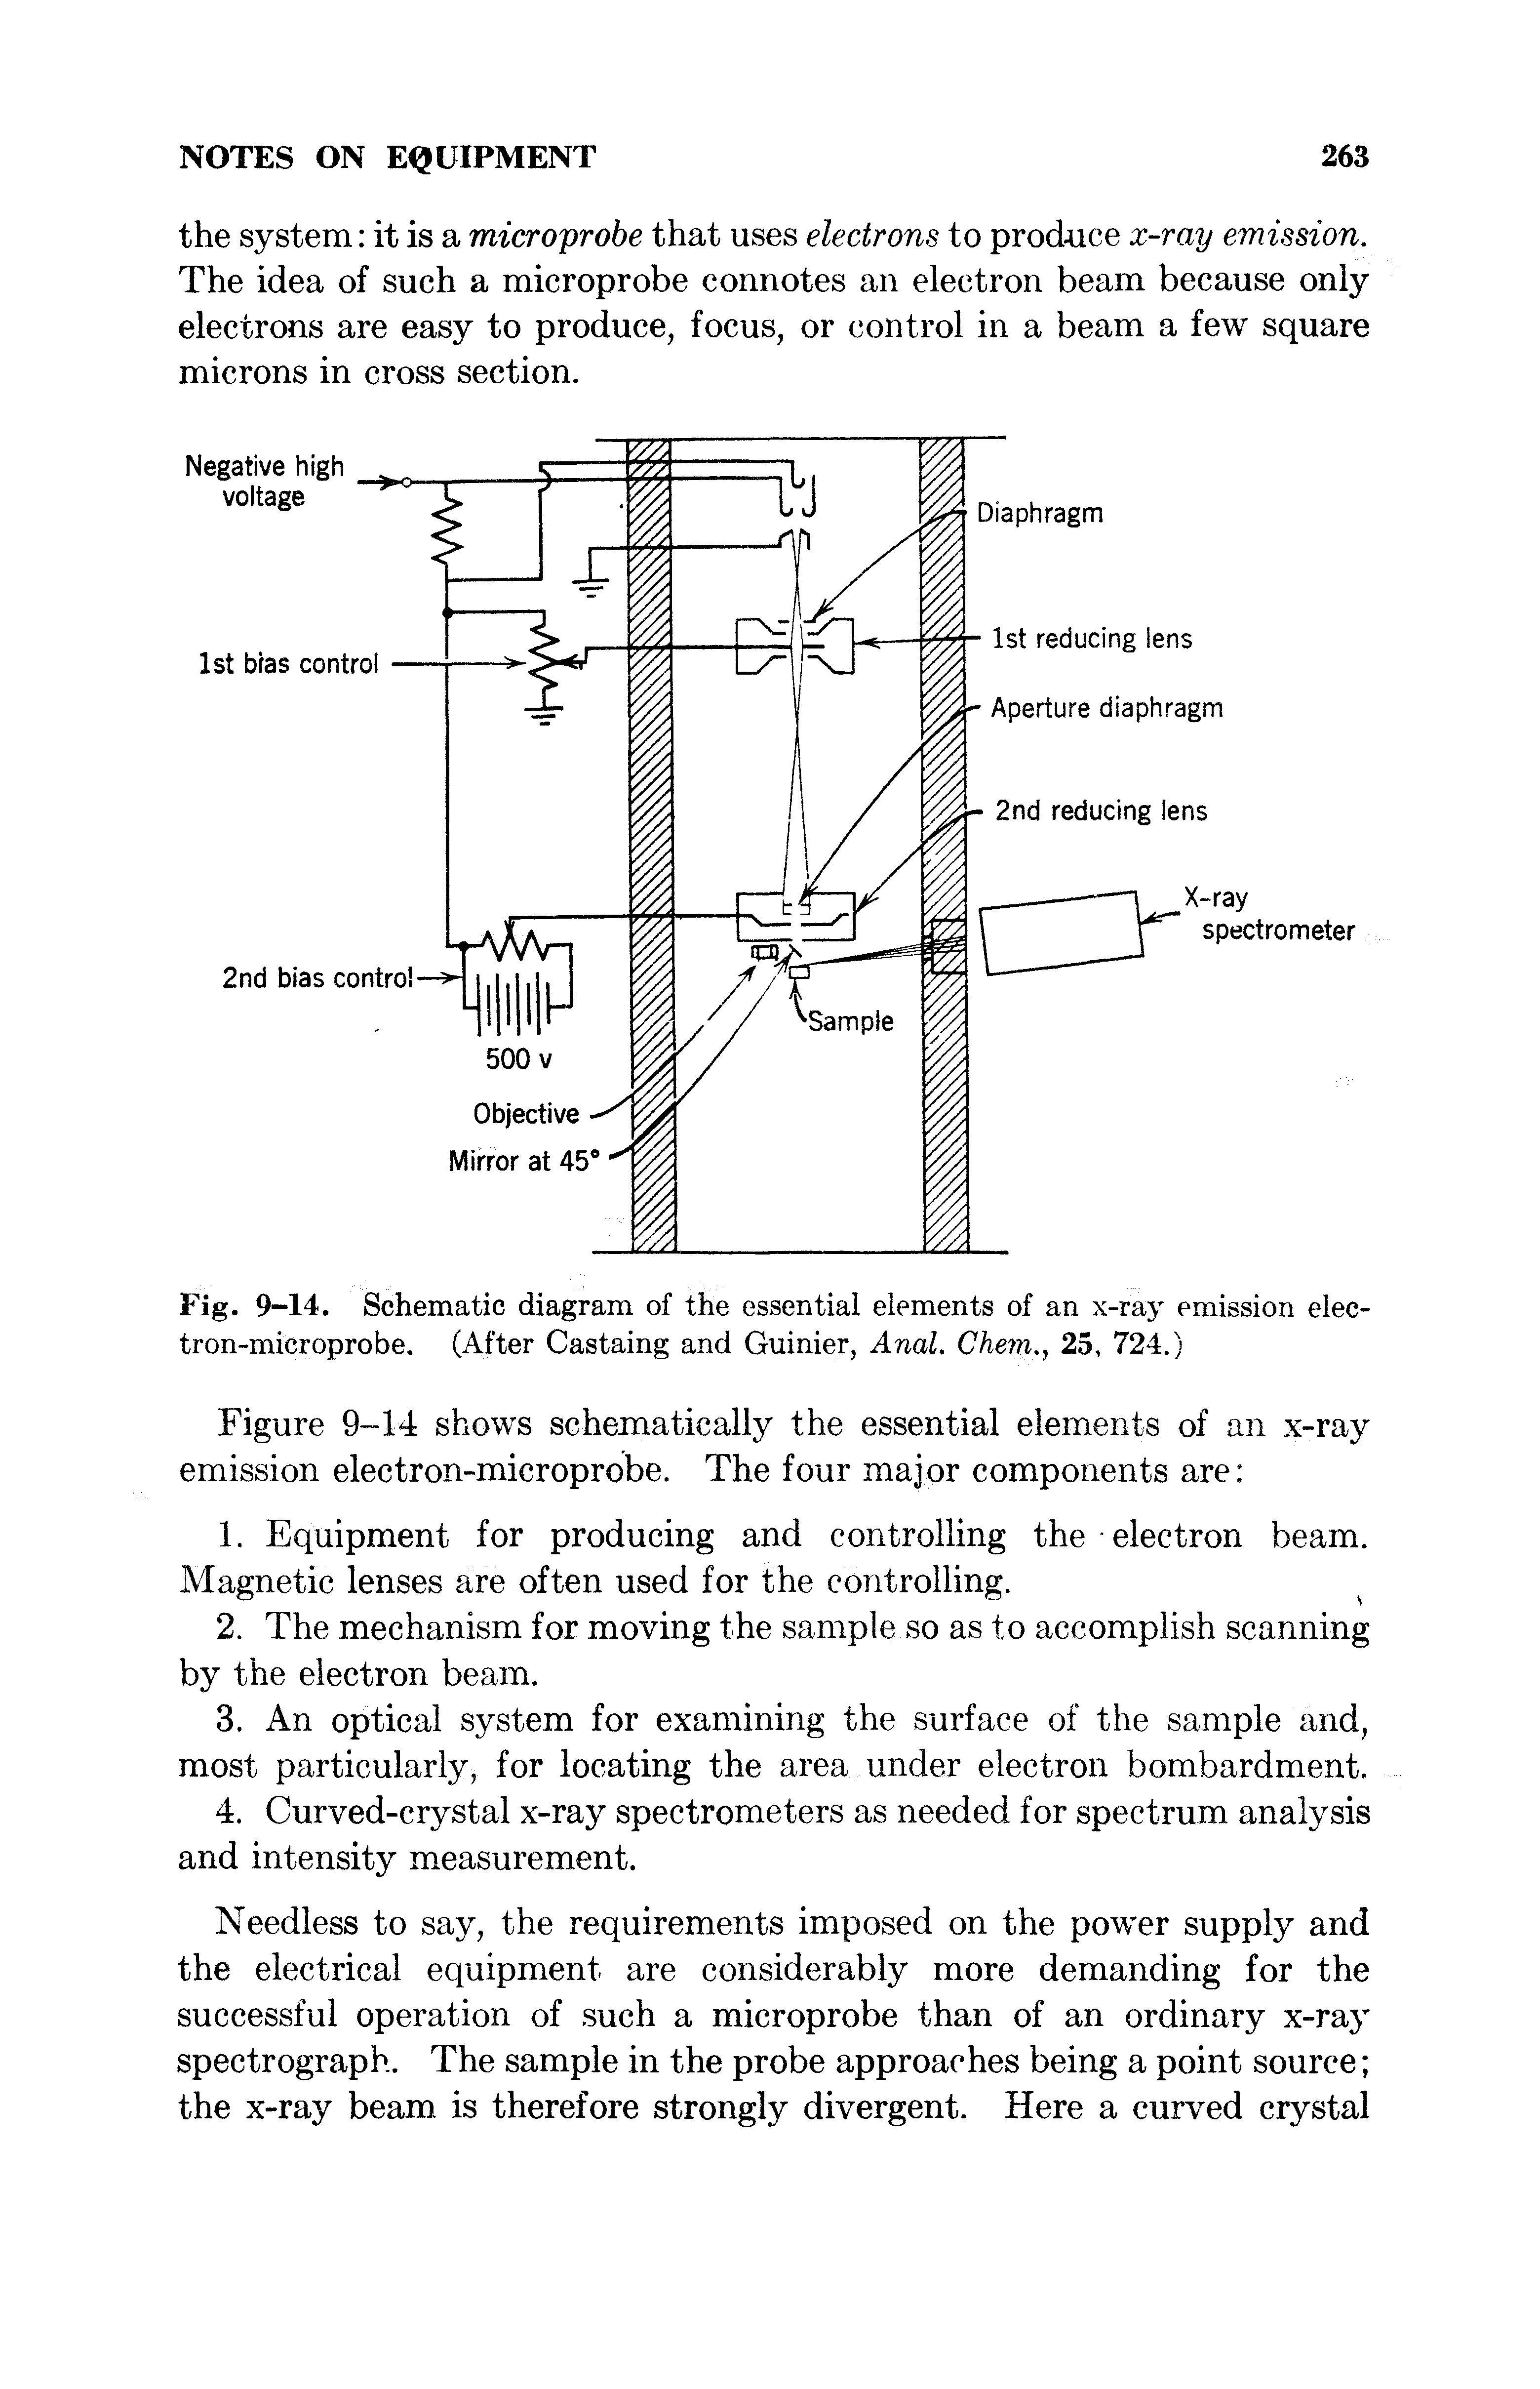 Fig. 9-14. Schematic diagram of the essential elements of an x-ray emission electron-microprobe. (After Castaing and Guinier, Anal. Chem., 25, 724.)...